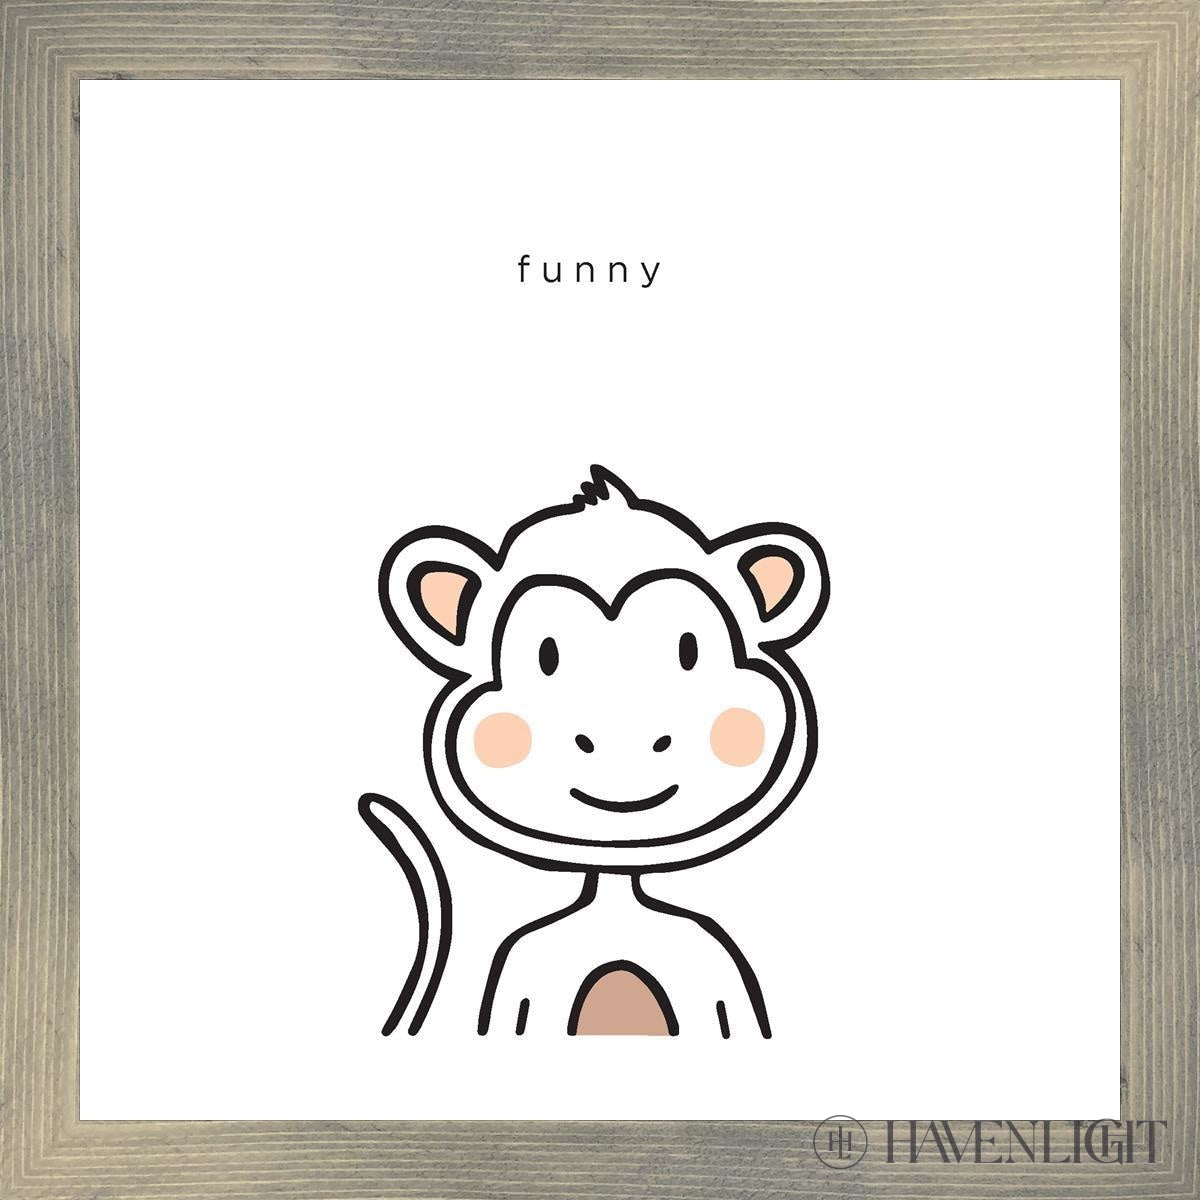 Funny Open Edition Print / 10 X Frame G 11 1/4 Art